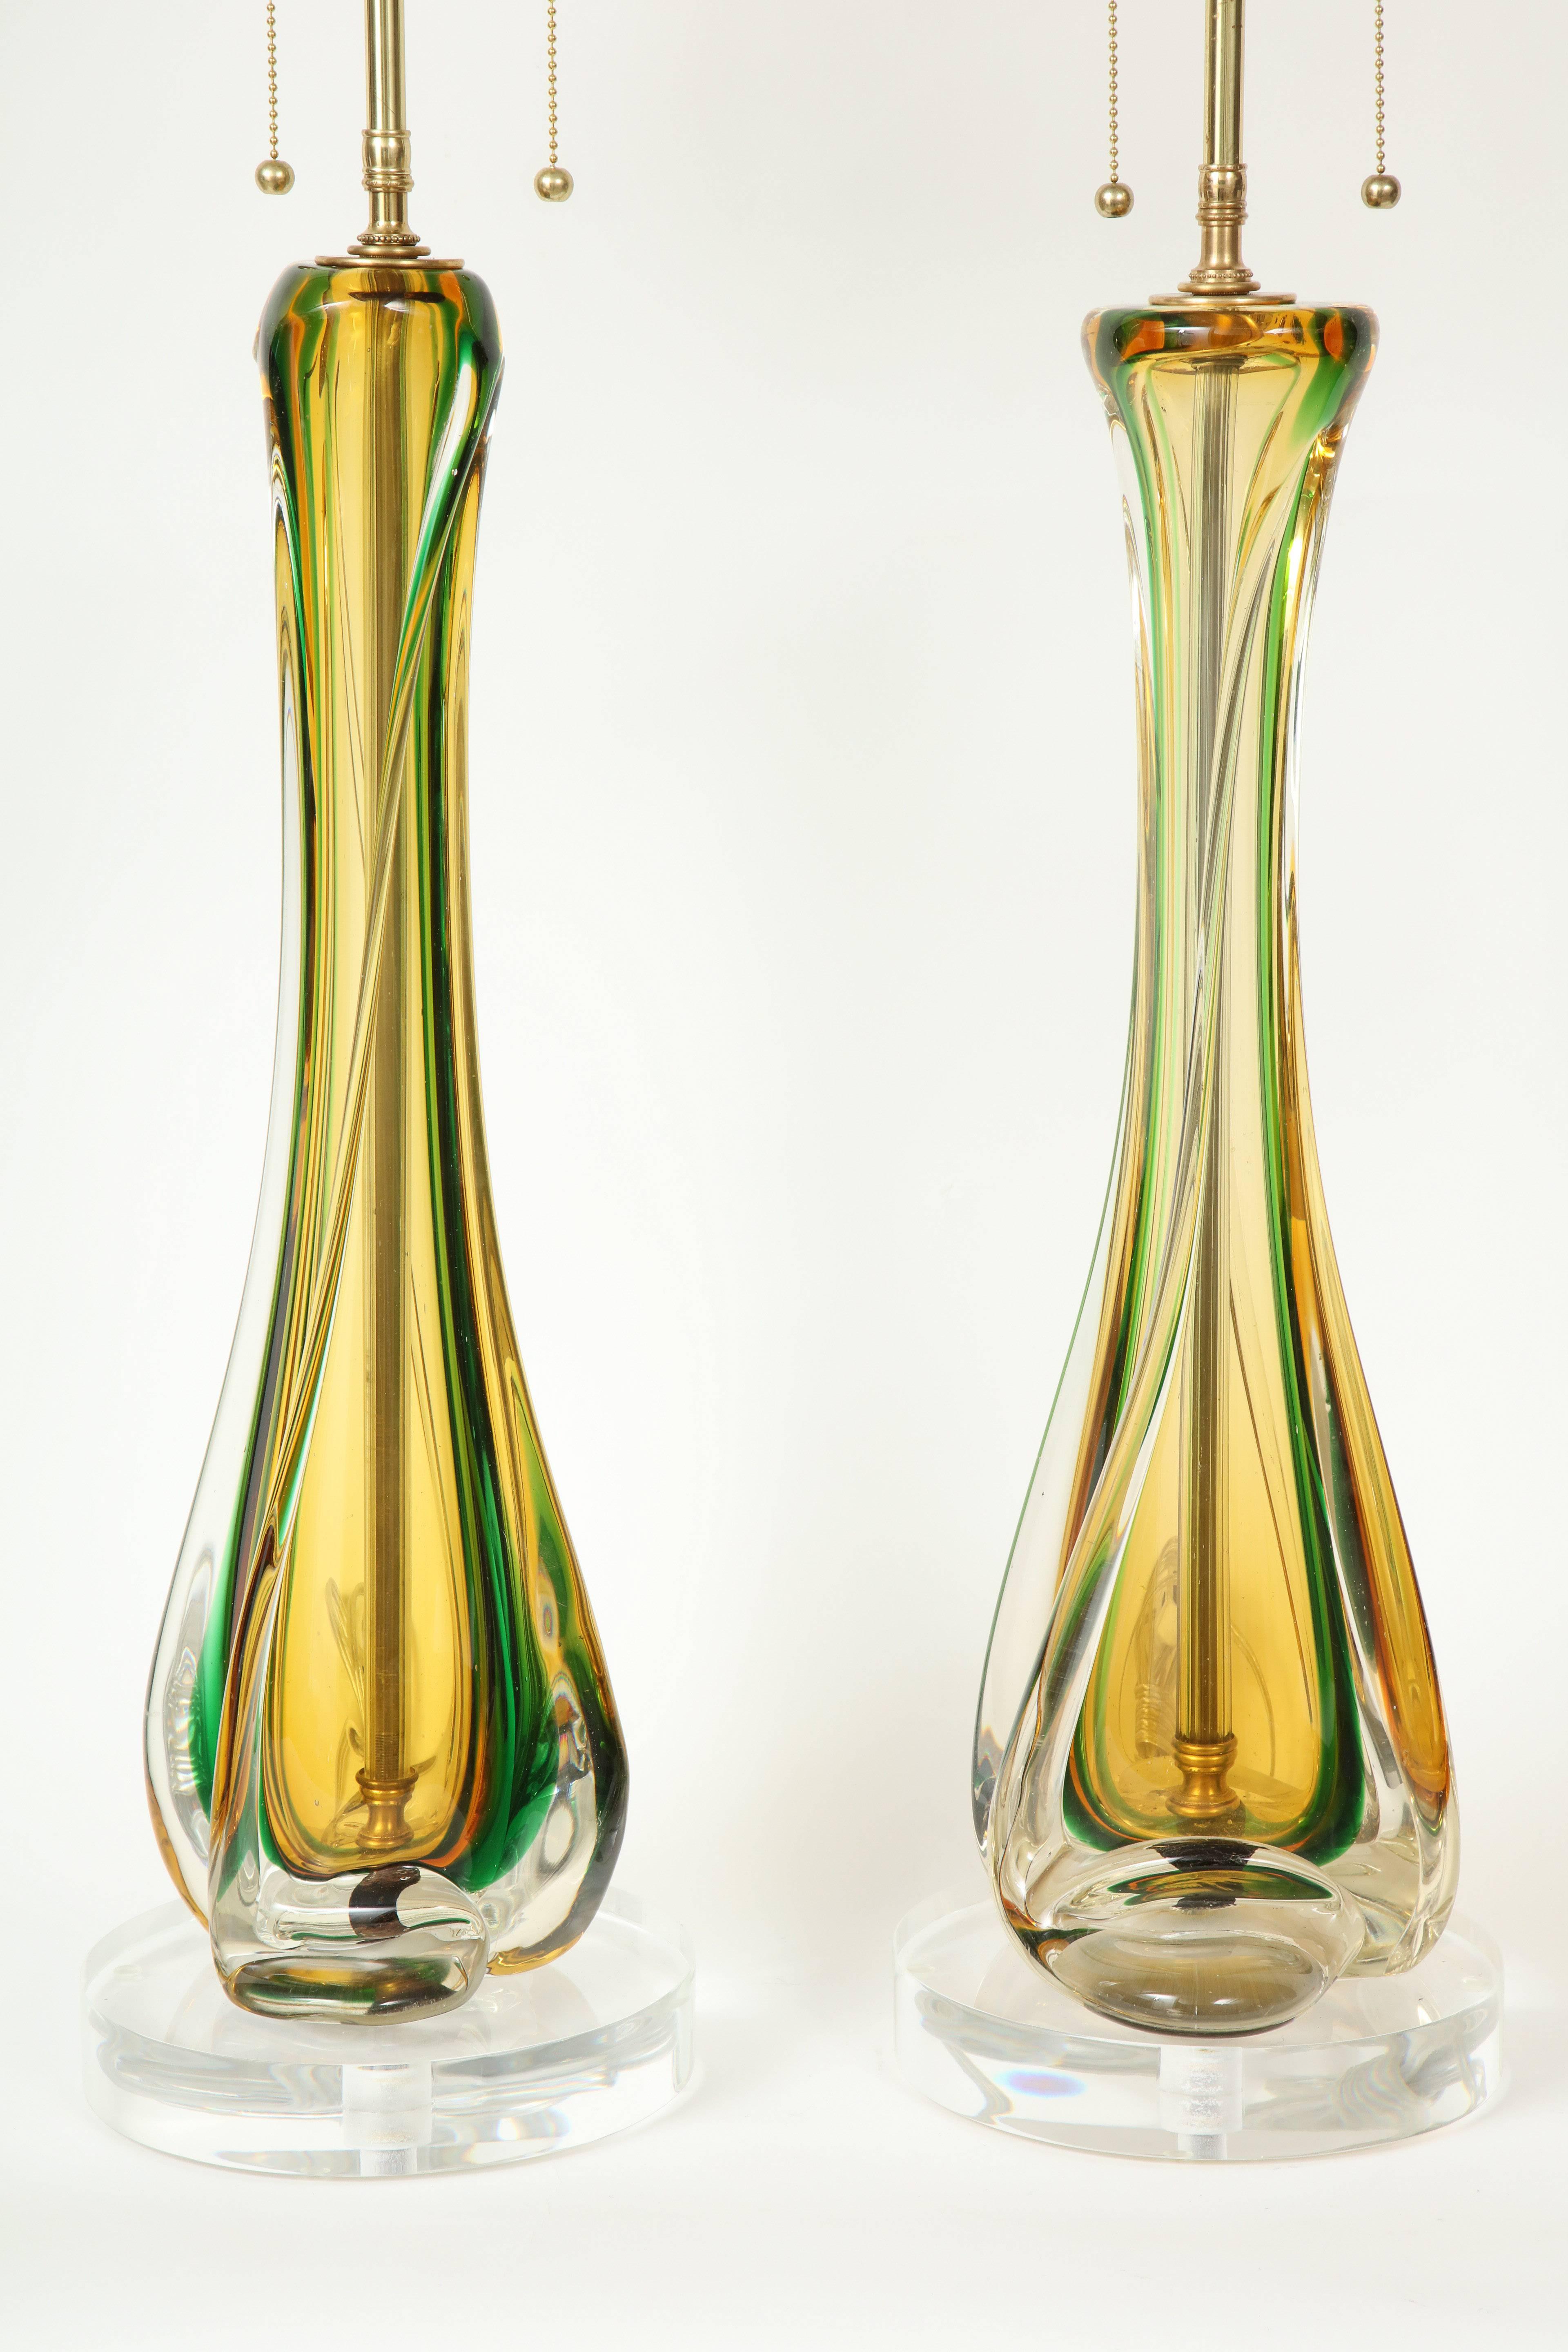 Large pair of Murano lamps by Seguso.
This handblown pair of Sommerso glass lamps in shades of green and amber encased a clear body are mounted on thick Lucite bases. 
They are newly rewired with polished brass double clusters that take standard